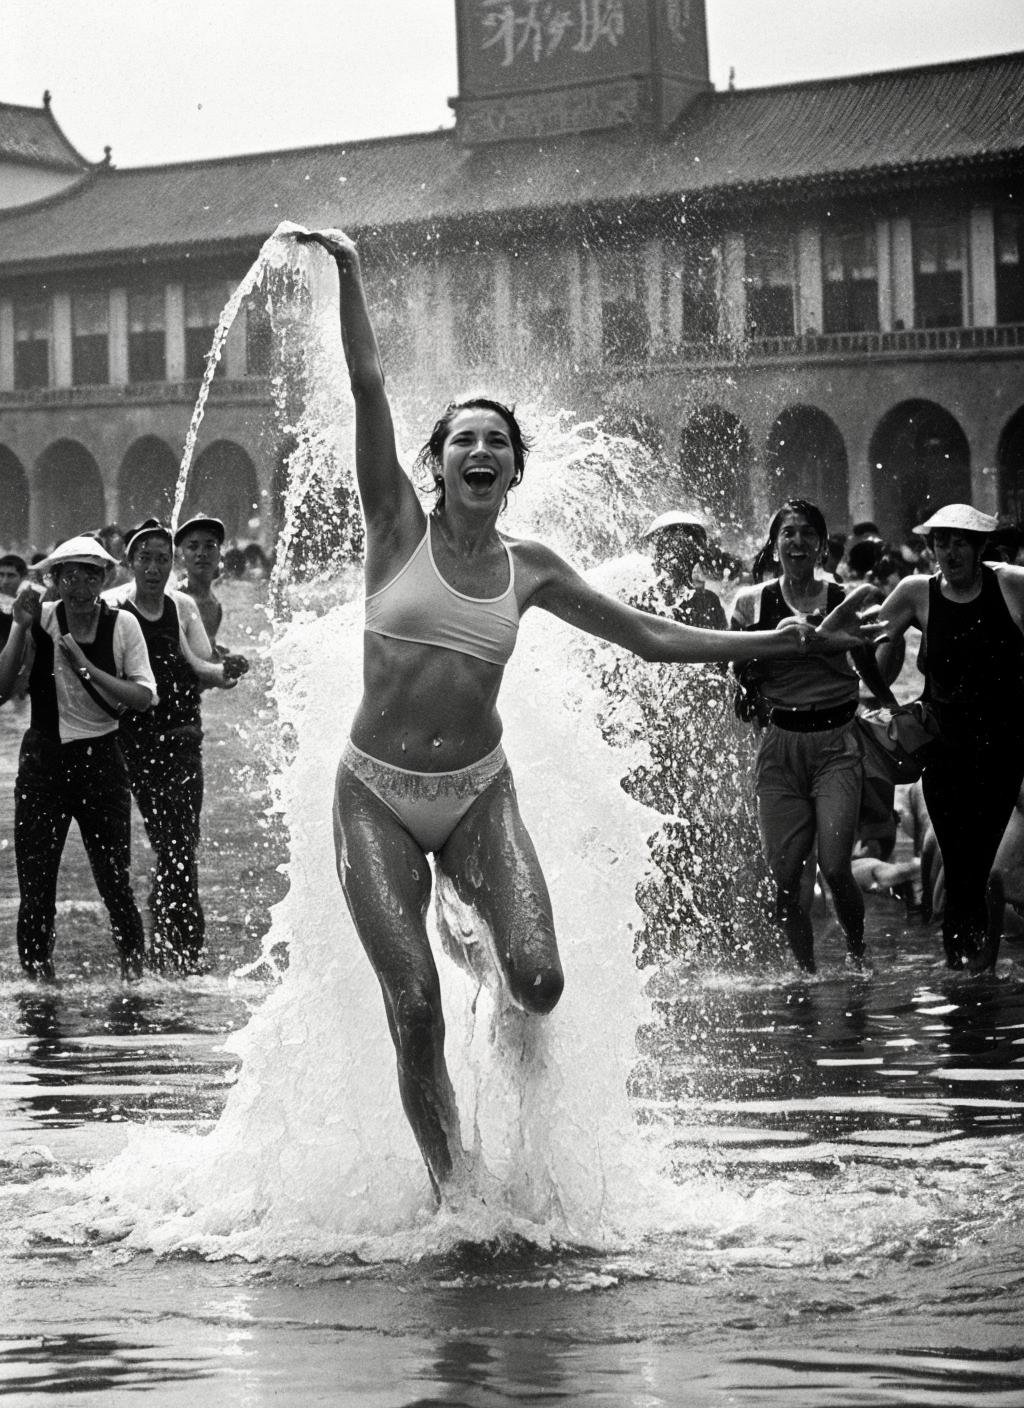 photo of a woman covered in water, running on water, water splashing on the street, dancing in the water, covered with water particles, water splashing face, flowing water, covered in water,   <lora:locon_conceptwater_v1_from_v1_64_32:0.75> , by Gerda Taro, in china, tiananmen square,water explosion, water splashes